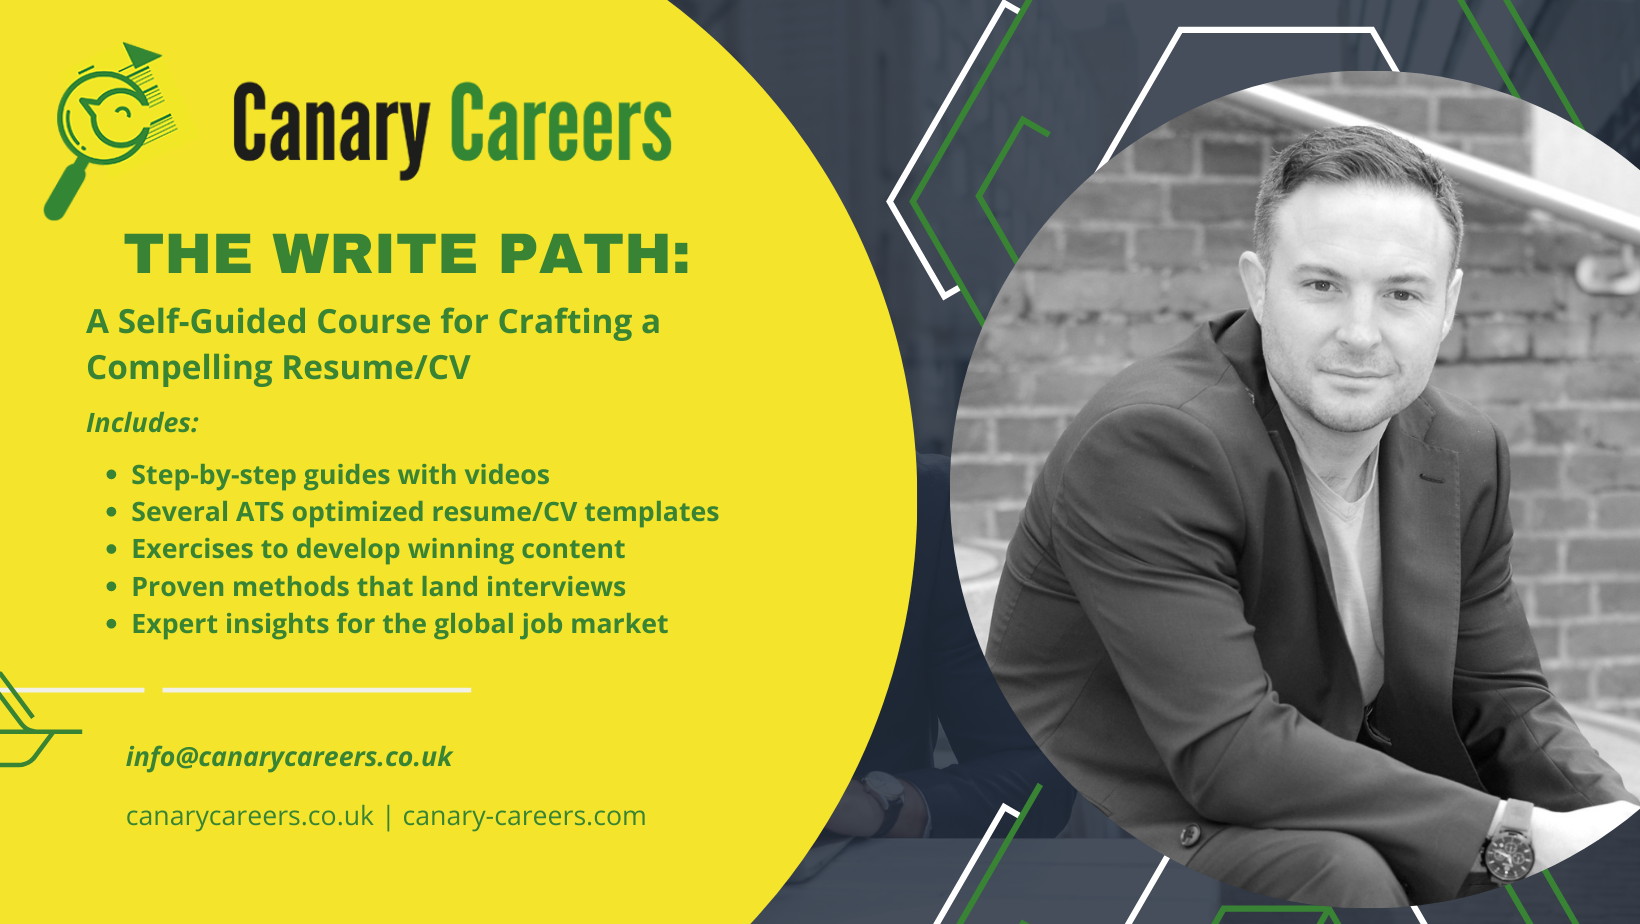 The Write Path: A Self-Guided Course for Crafting a Compelling Resume/CV 